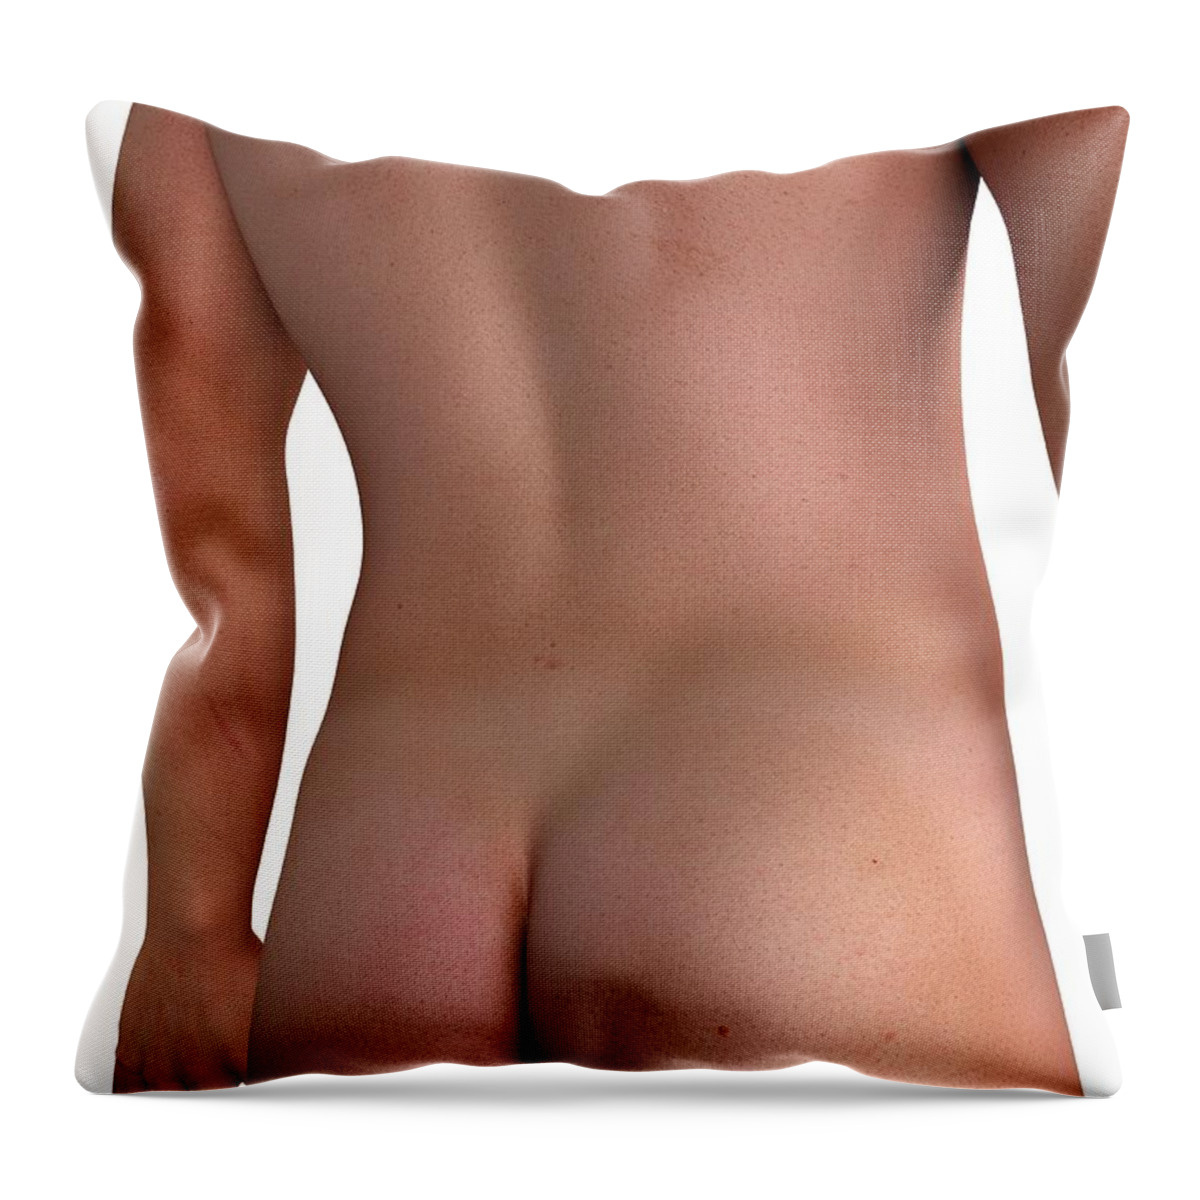 Human Arm Throw Pillow featuring the digital art Male Back, Artwork by Sciepro